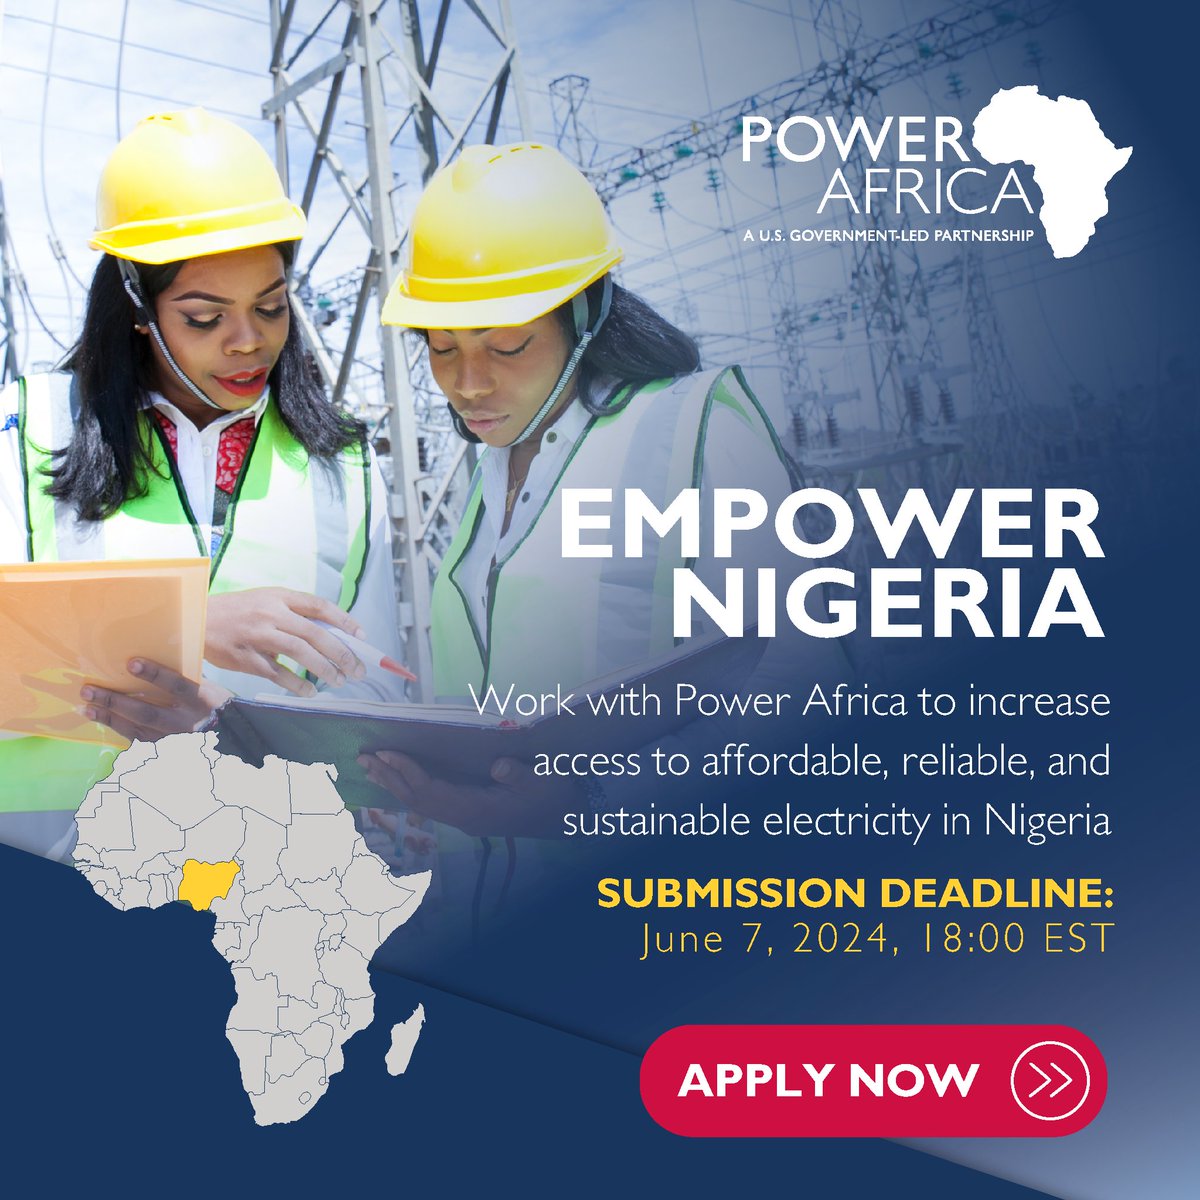 BREAKING RFP | Apply to work with Power Africa to increase #EnergyAccess in Nigeria!

❓ Questions deadline: 5/17/24
❗ Submission deadline: 6/7/24
🔗 Info: ow.ly/SKNO50RA1Za

@USAIDWestAfrica @USAID @USAIDAfrica @WorkwithUSAID @AfricaMediaHub @USinNigeria
@USAIDNigeria